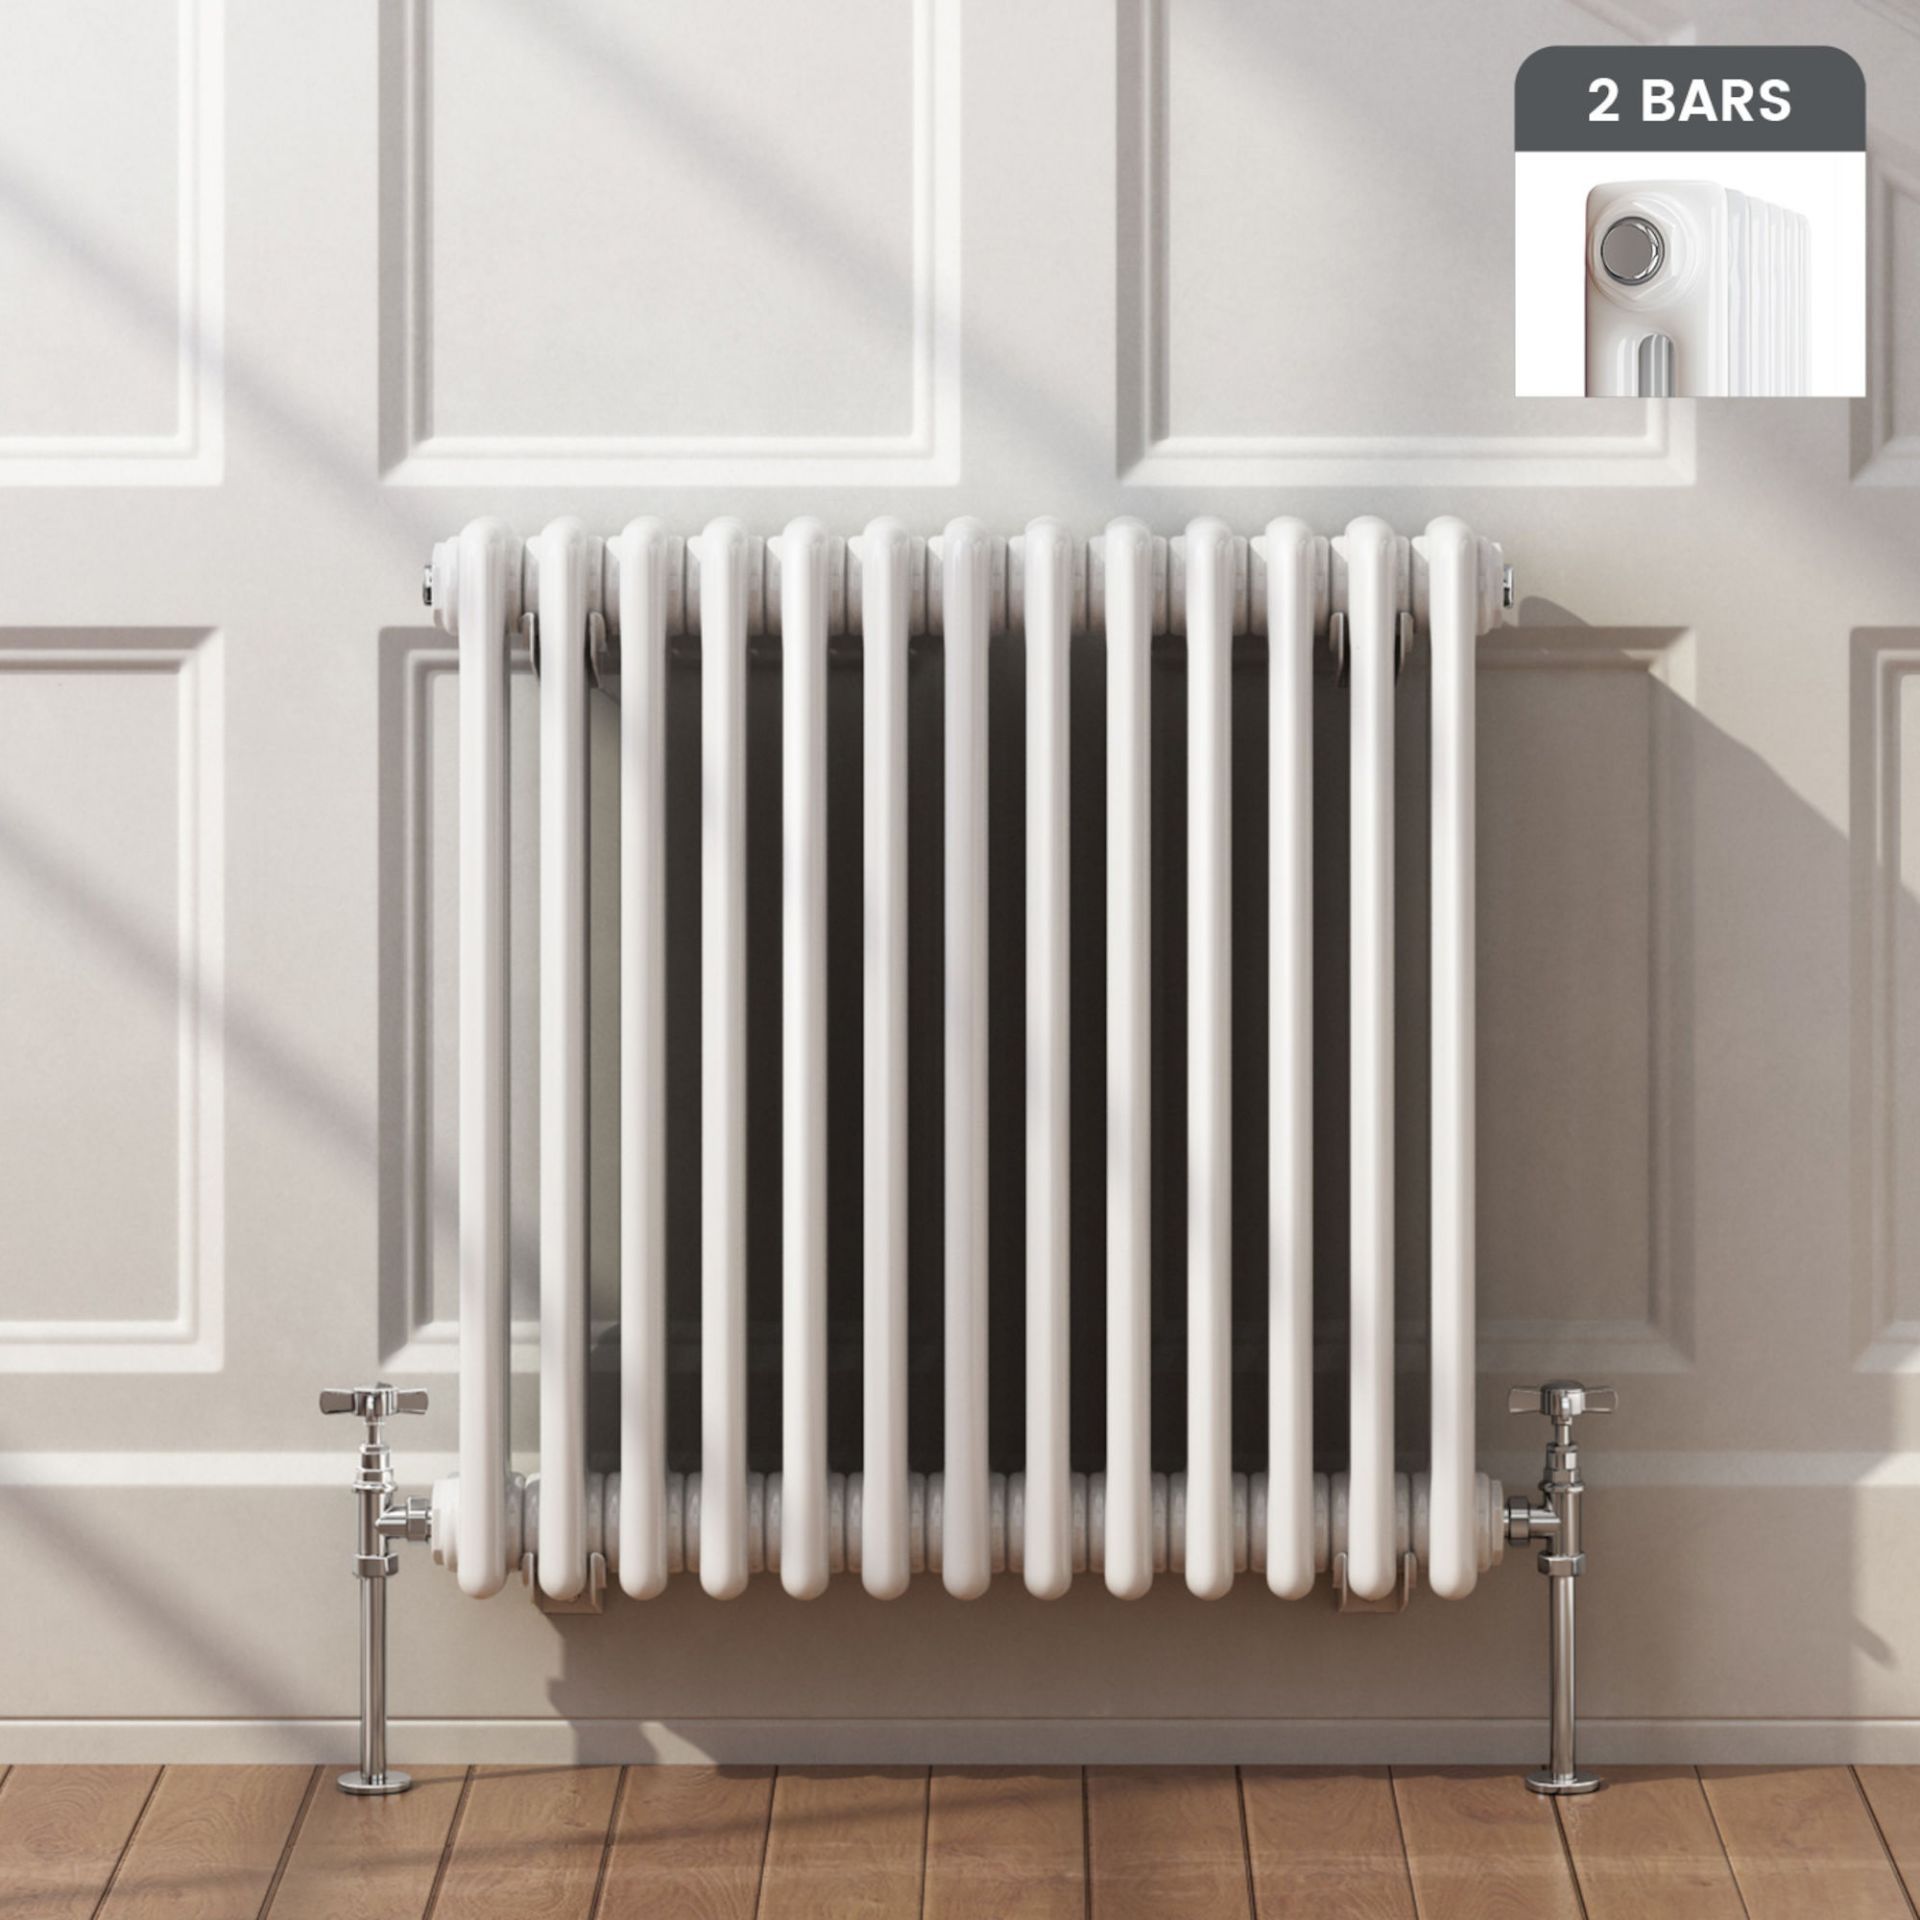 NEW & BOXED 600x603mm White Double Panel Horizontal Colosseum Traditional Radiator. RRP £395....